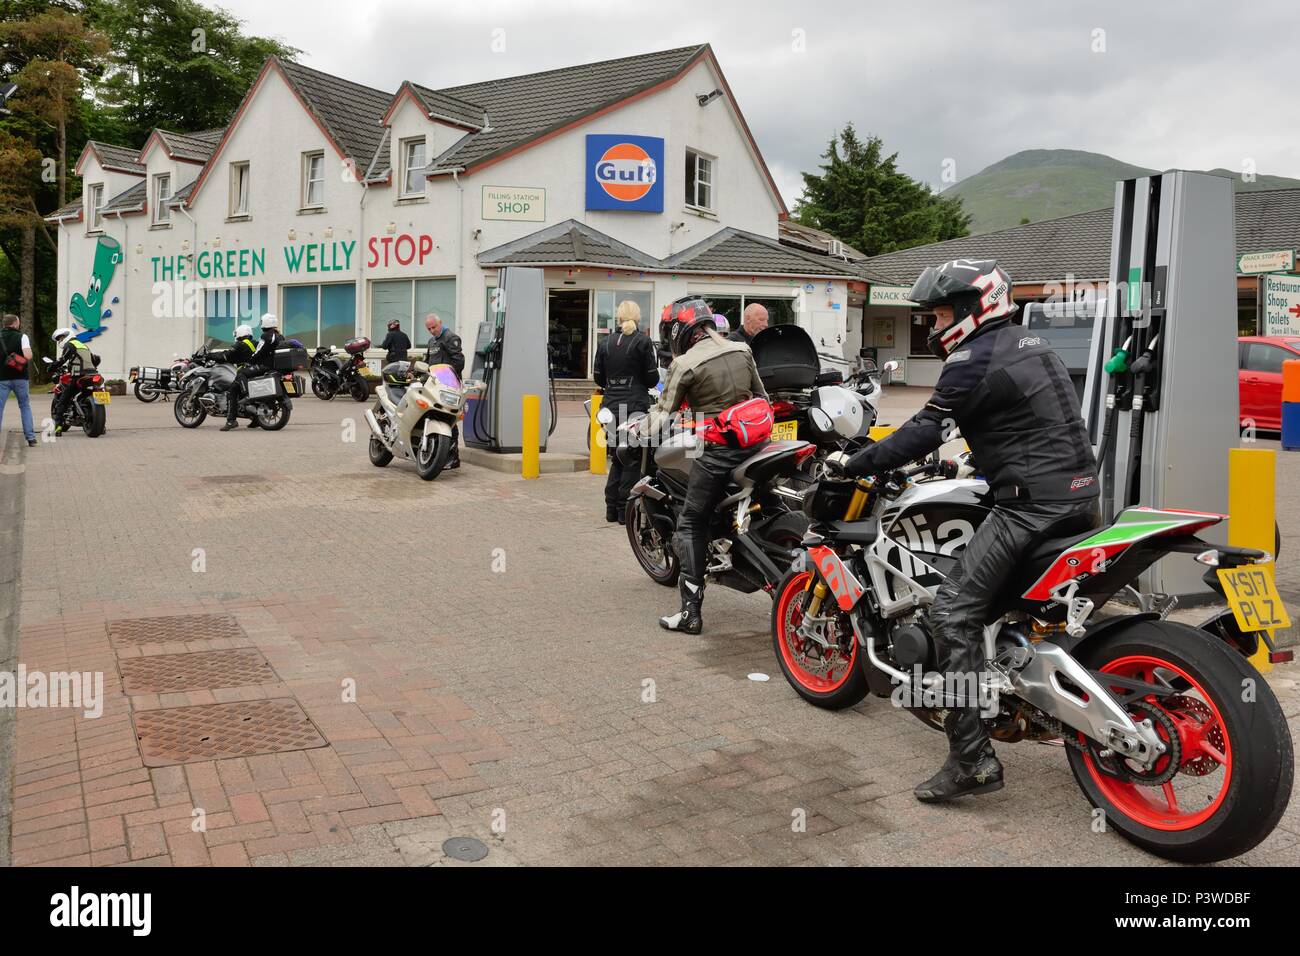 The Green Welly filling station and restaurant on the A82 at Tyndrum, Crianlarich, Scotland Uk, is a favourite stop for bikers and tourists. Stock Photo